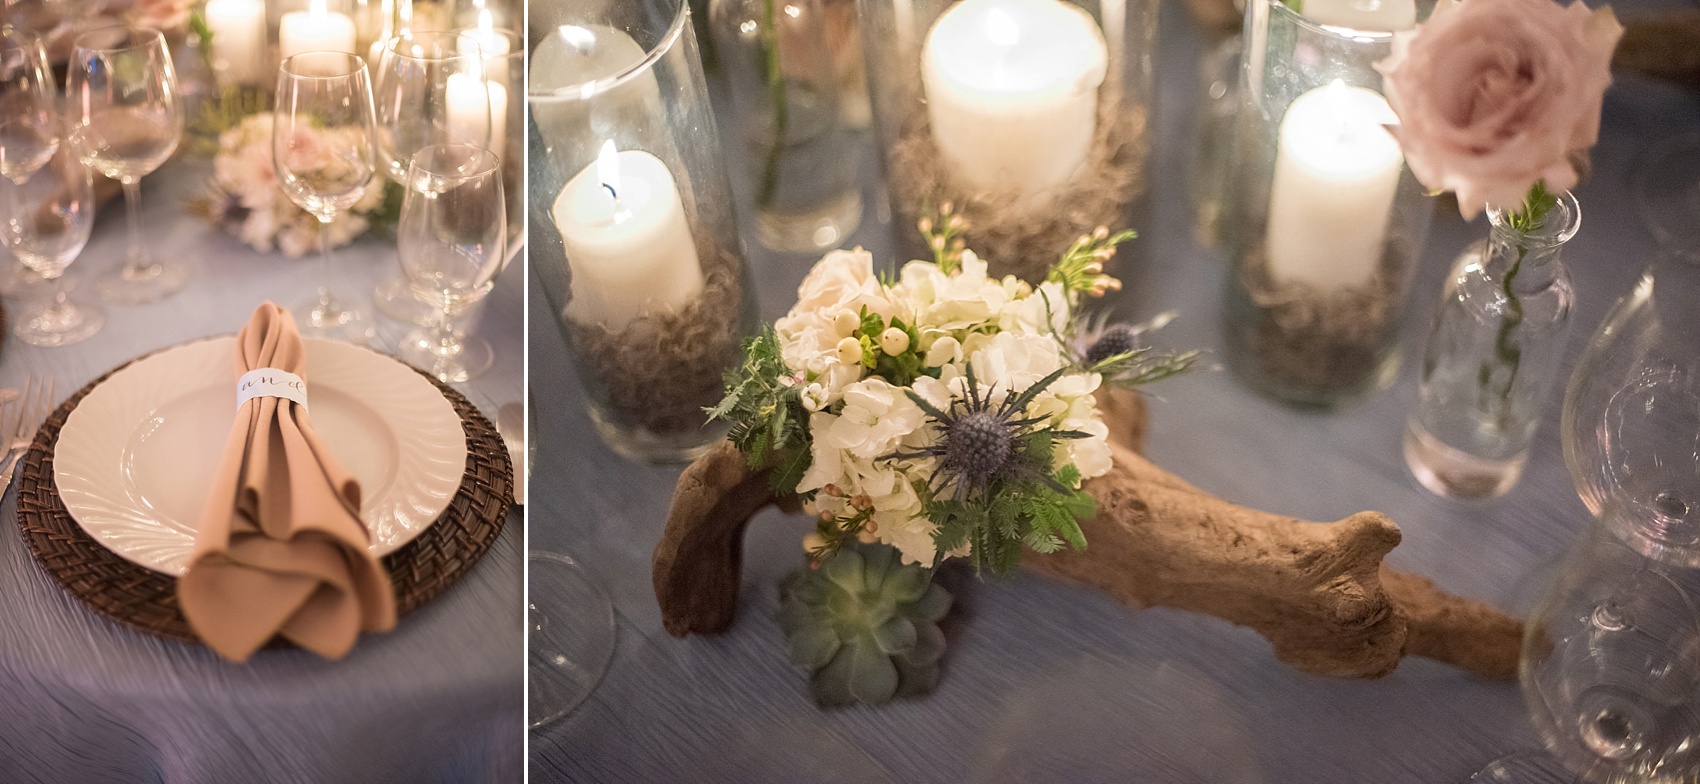 Raleigh North Carolina wedding photographer Mikkel Paige visits Merrimon-Wynne bridal event, featuring Party Reflections rentals and Simply Elegant Floral Design. Calligraphy by One and Only. 